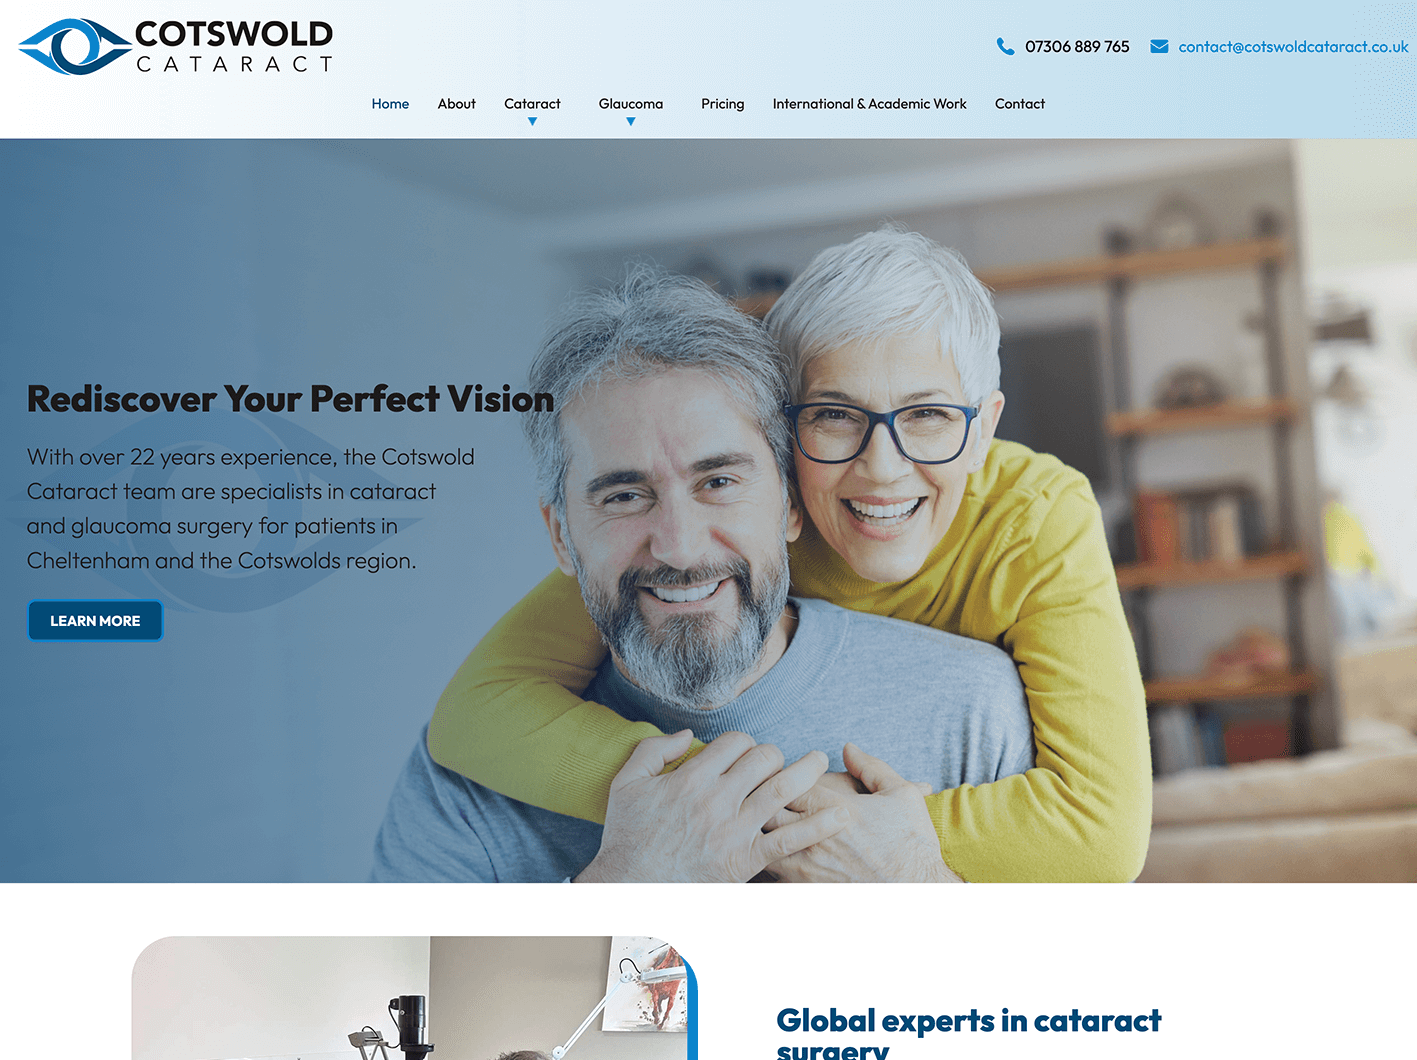 Cotswolds cataracts website